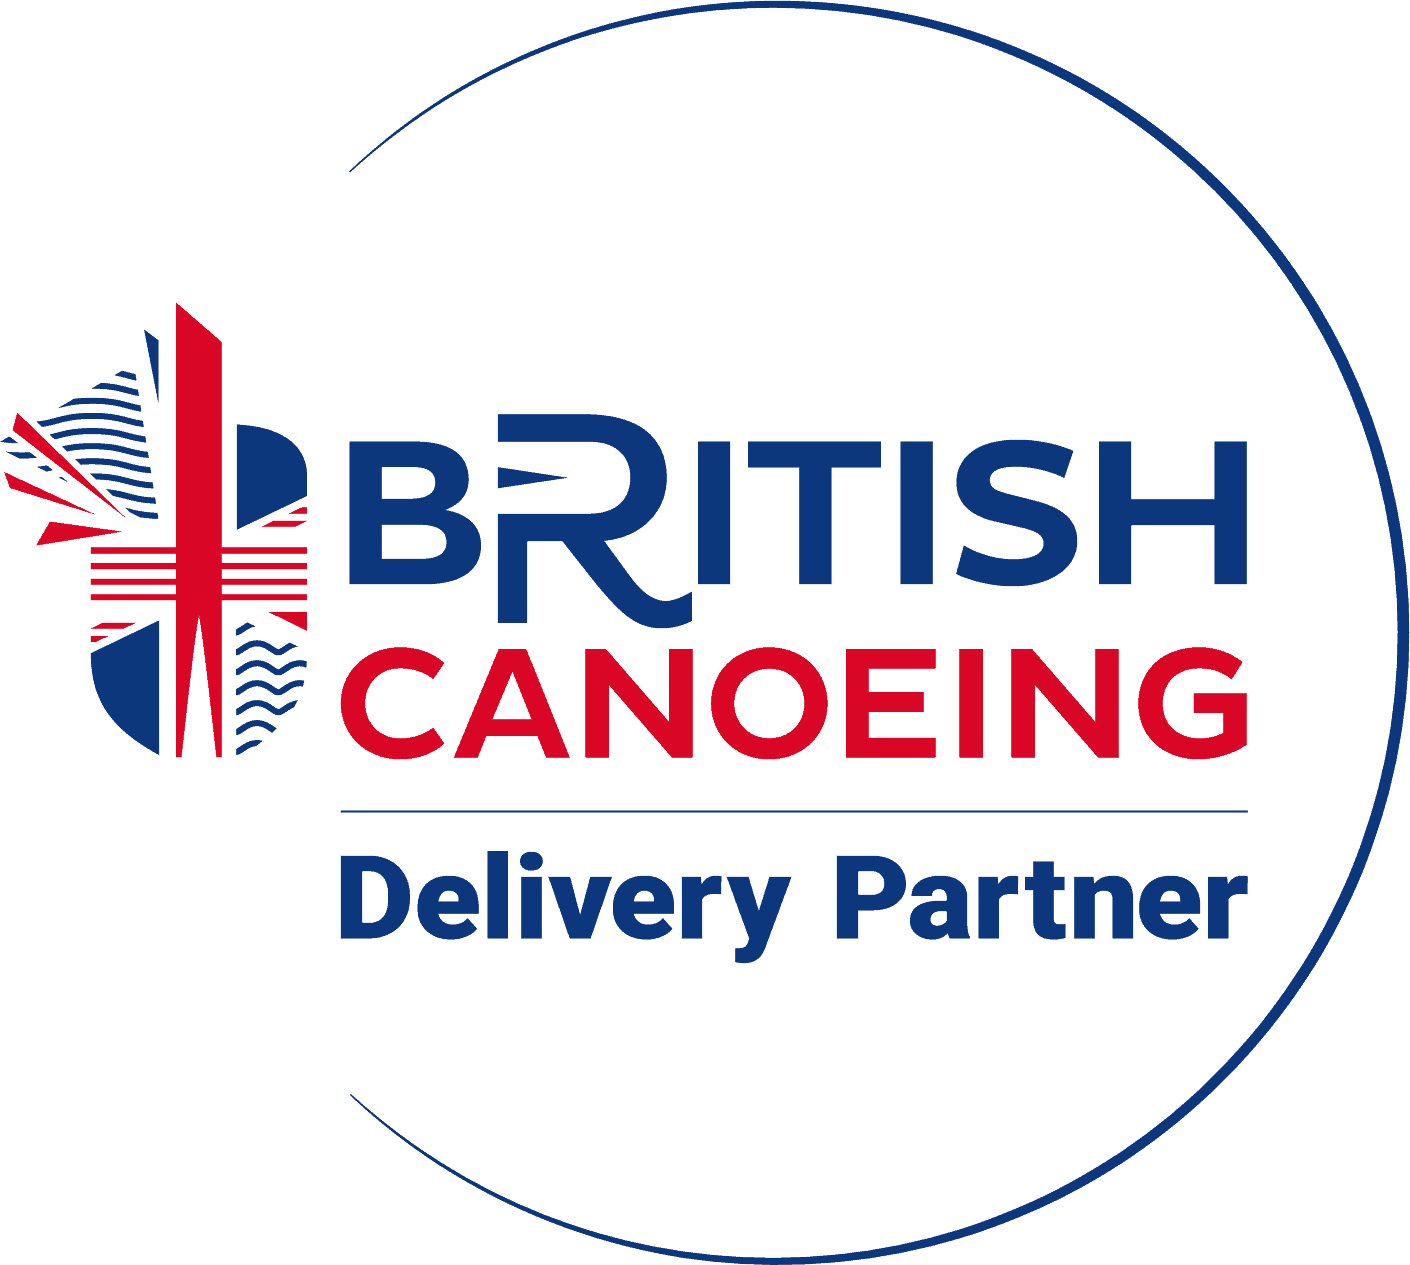 British_Canoeing_Delivery_Partner_Full_Colour_Logo copy.png